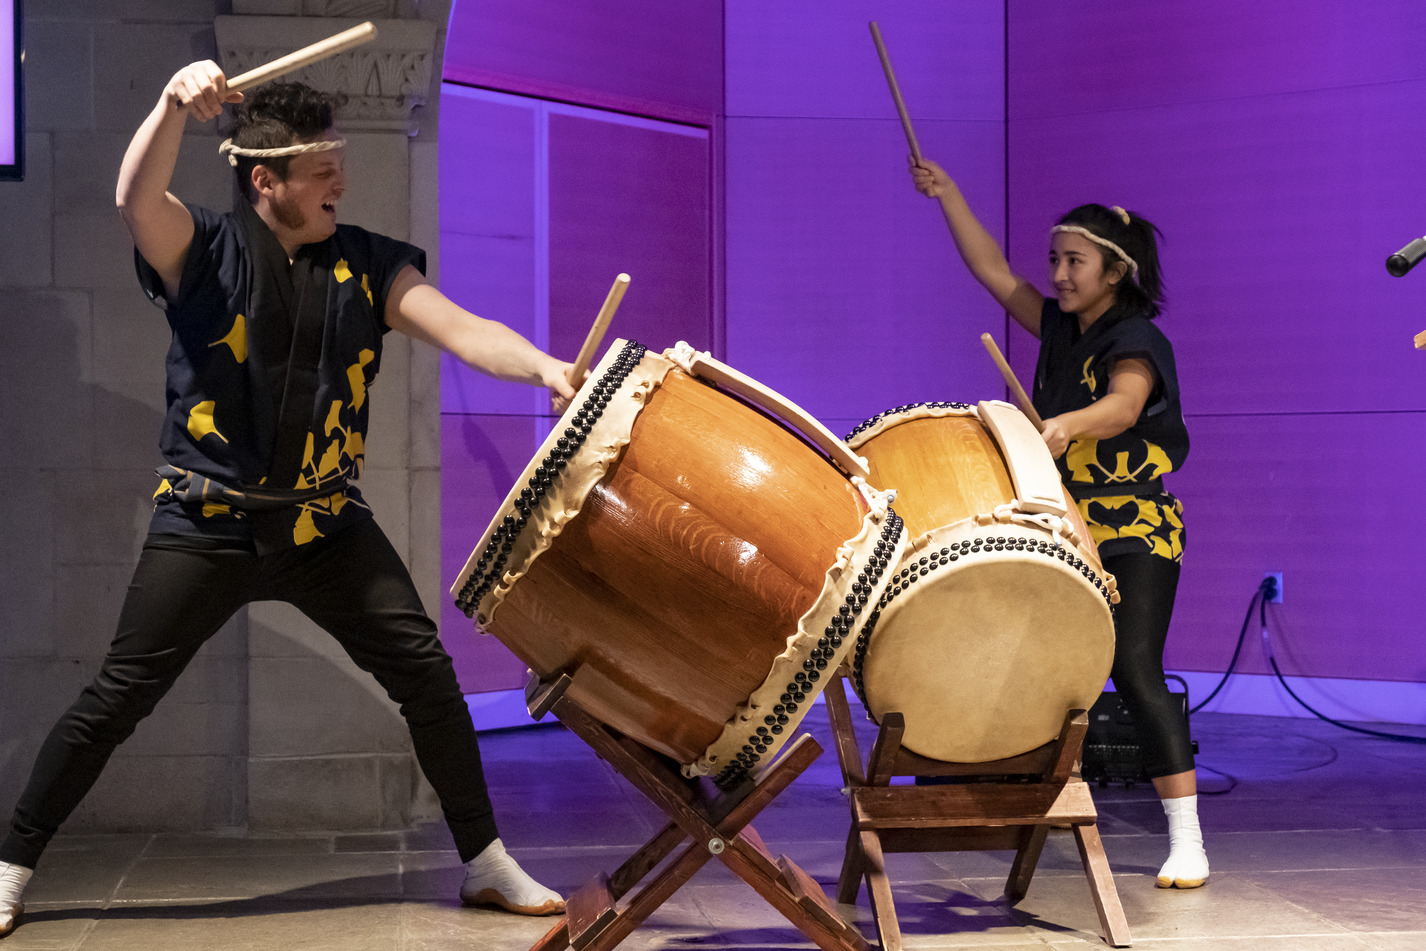 wo students banging on drums as part of a Taiko performance. 